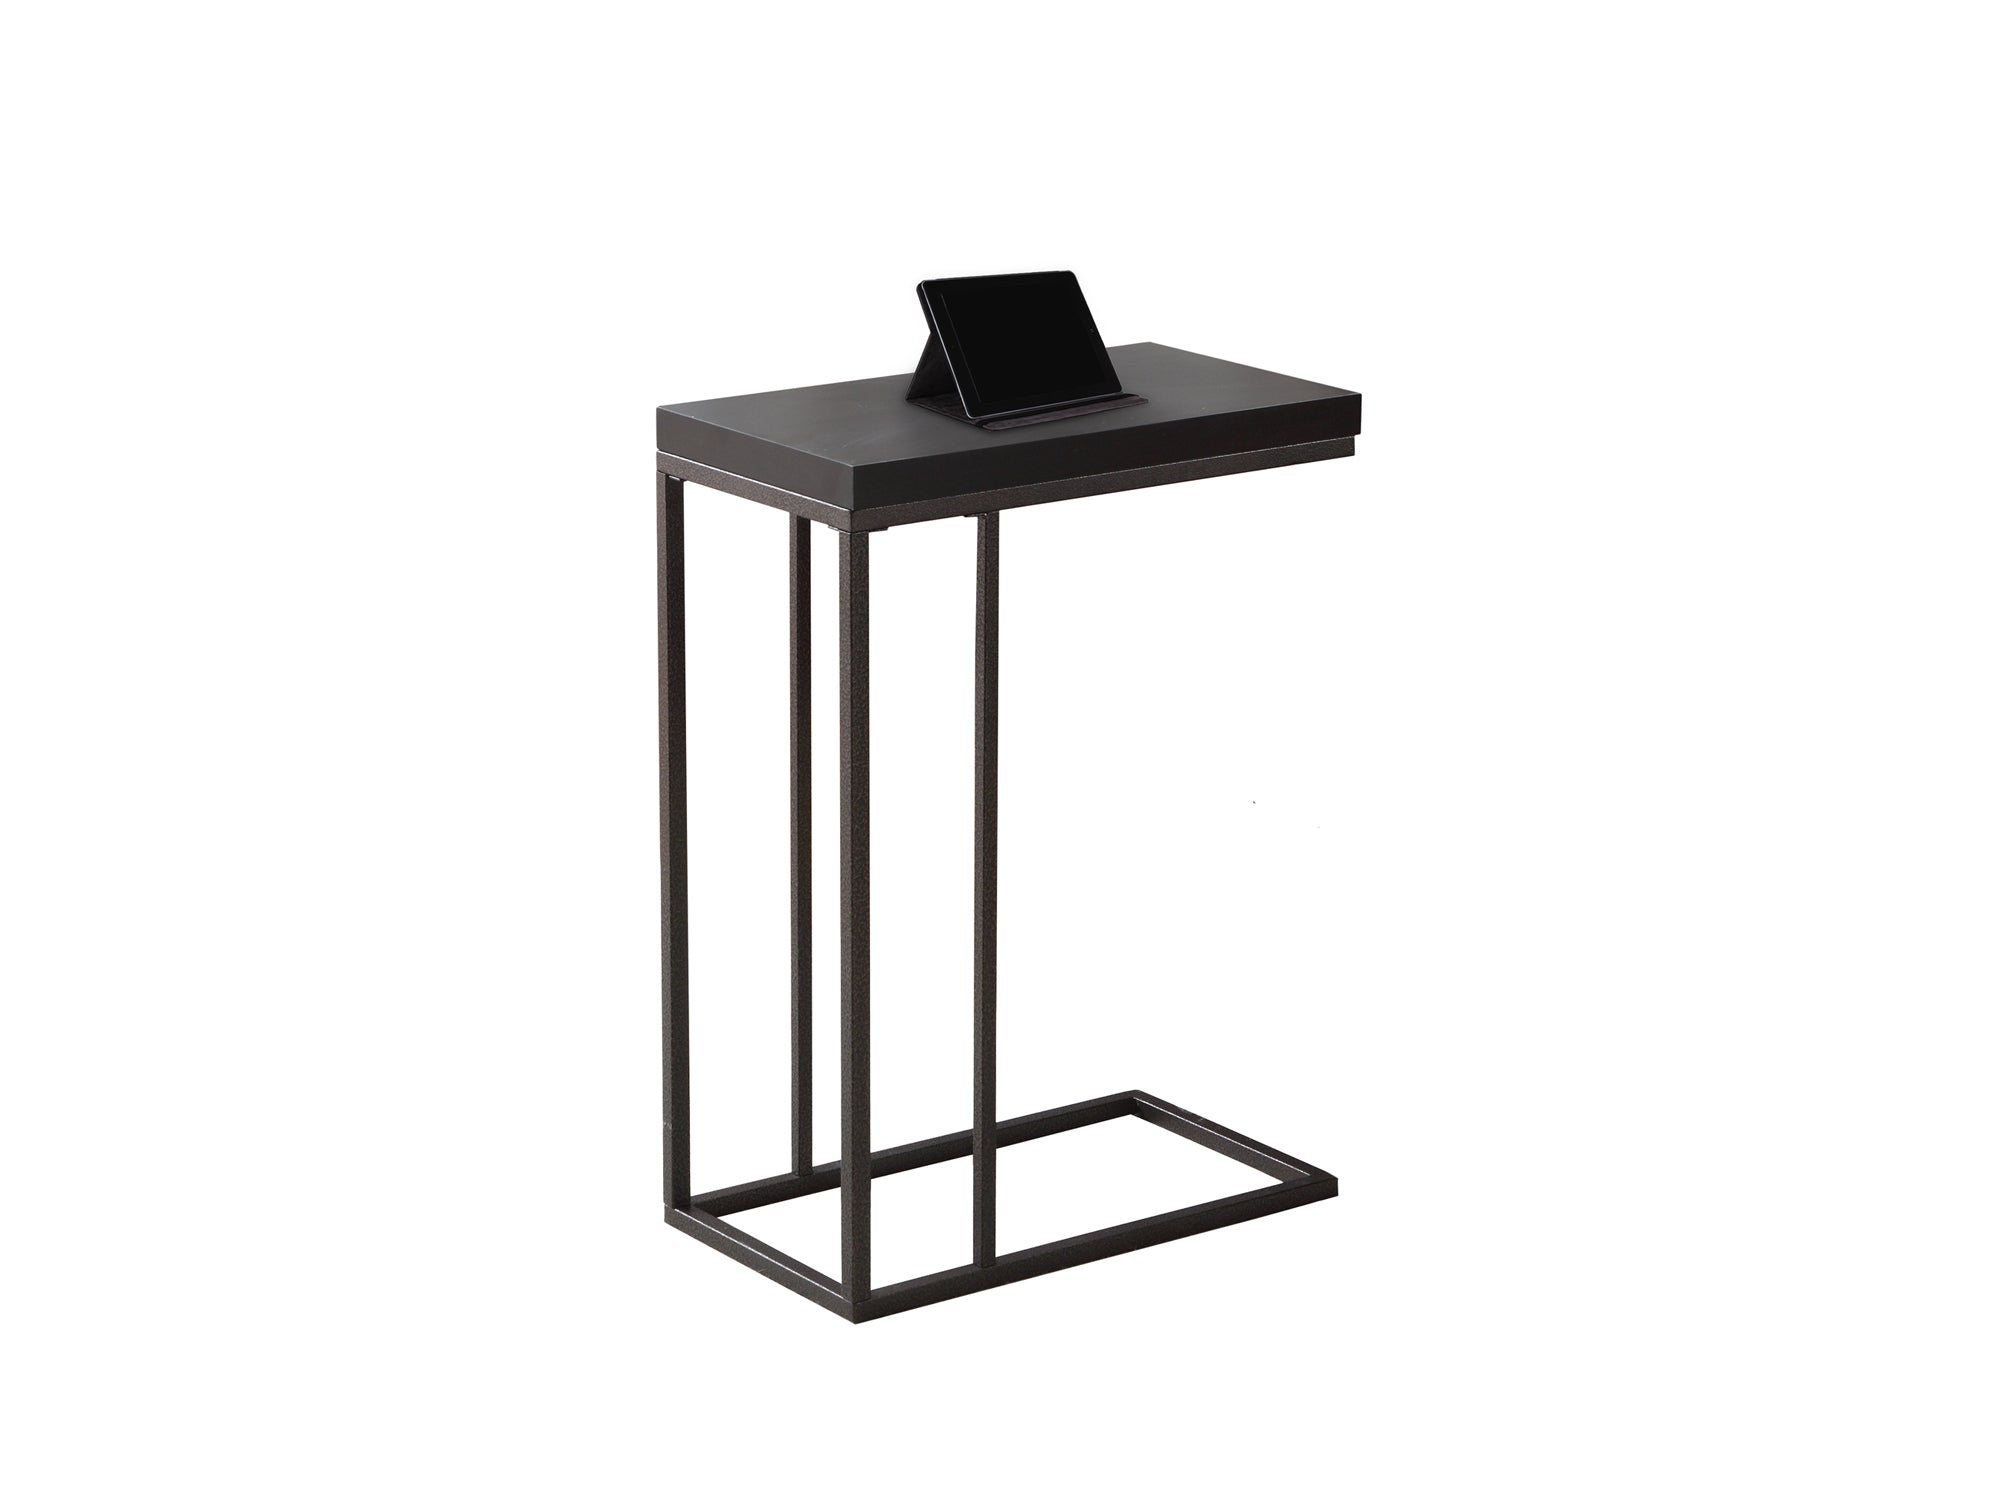 MN-183088    Accent Table, C-Shaped, End, Side, Snack, Living Room, Bedroom, Metal Legs, Laminate, Dark Brown, Bronze Metal, Contemporary, Modern